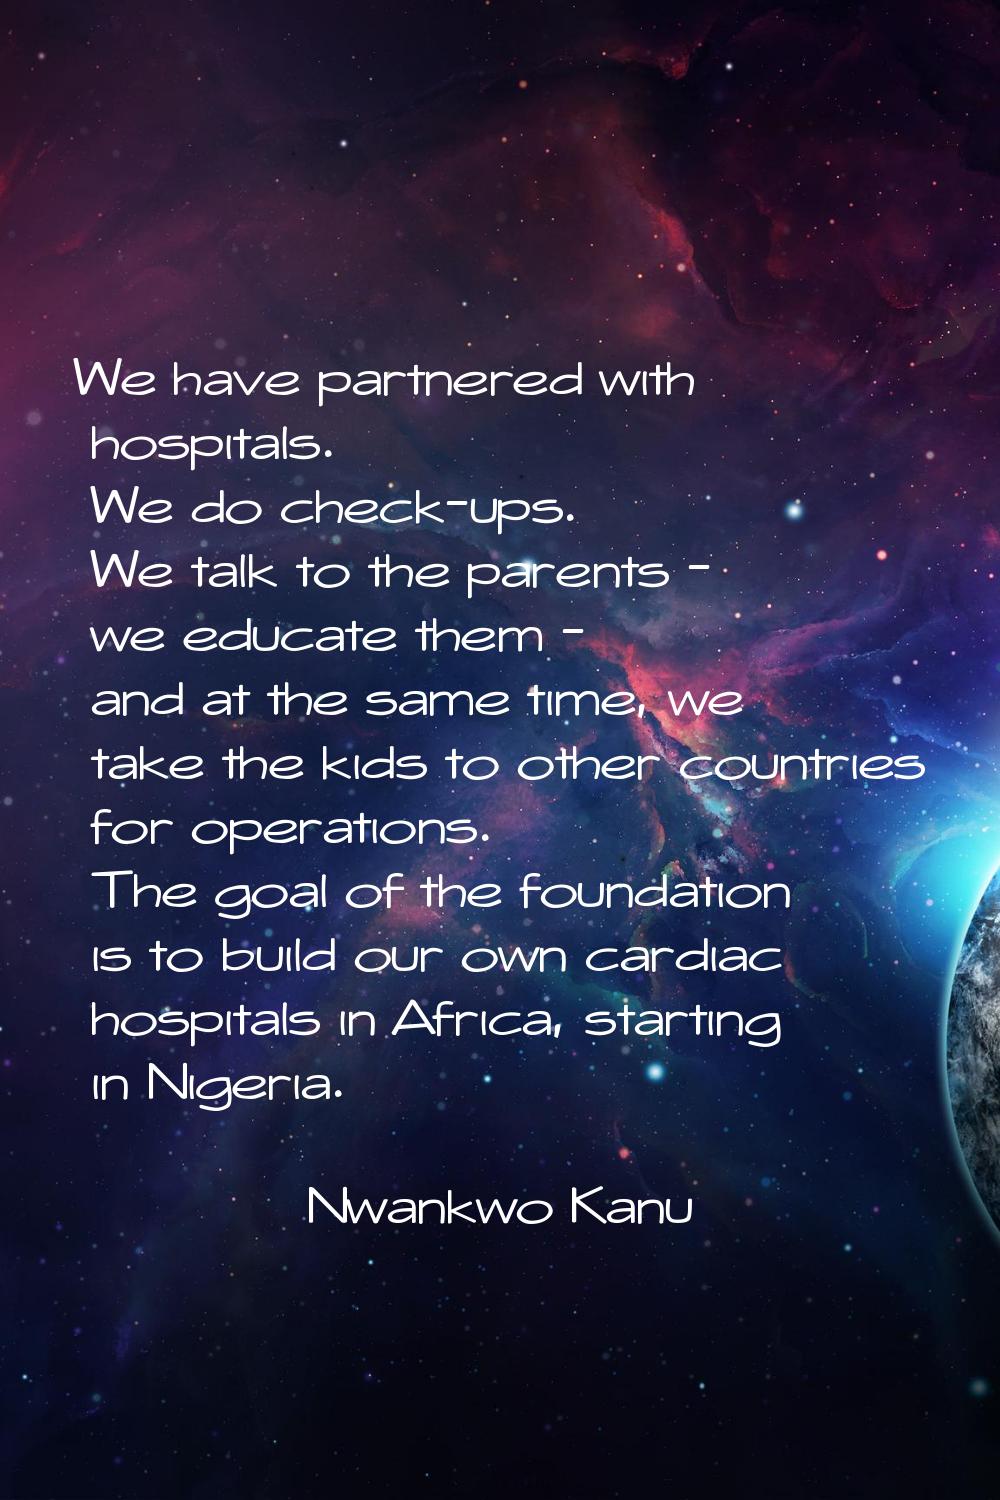 We have partnered with hospitals. We do check-ups. We talk to the parents - we educate them - and a